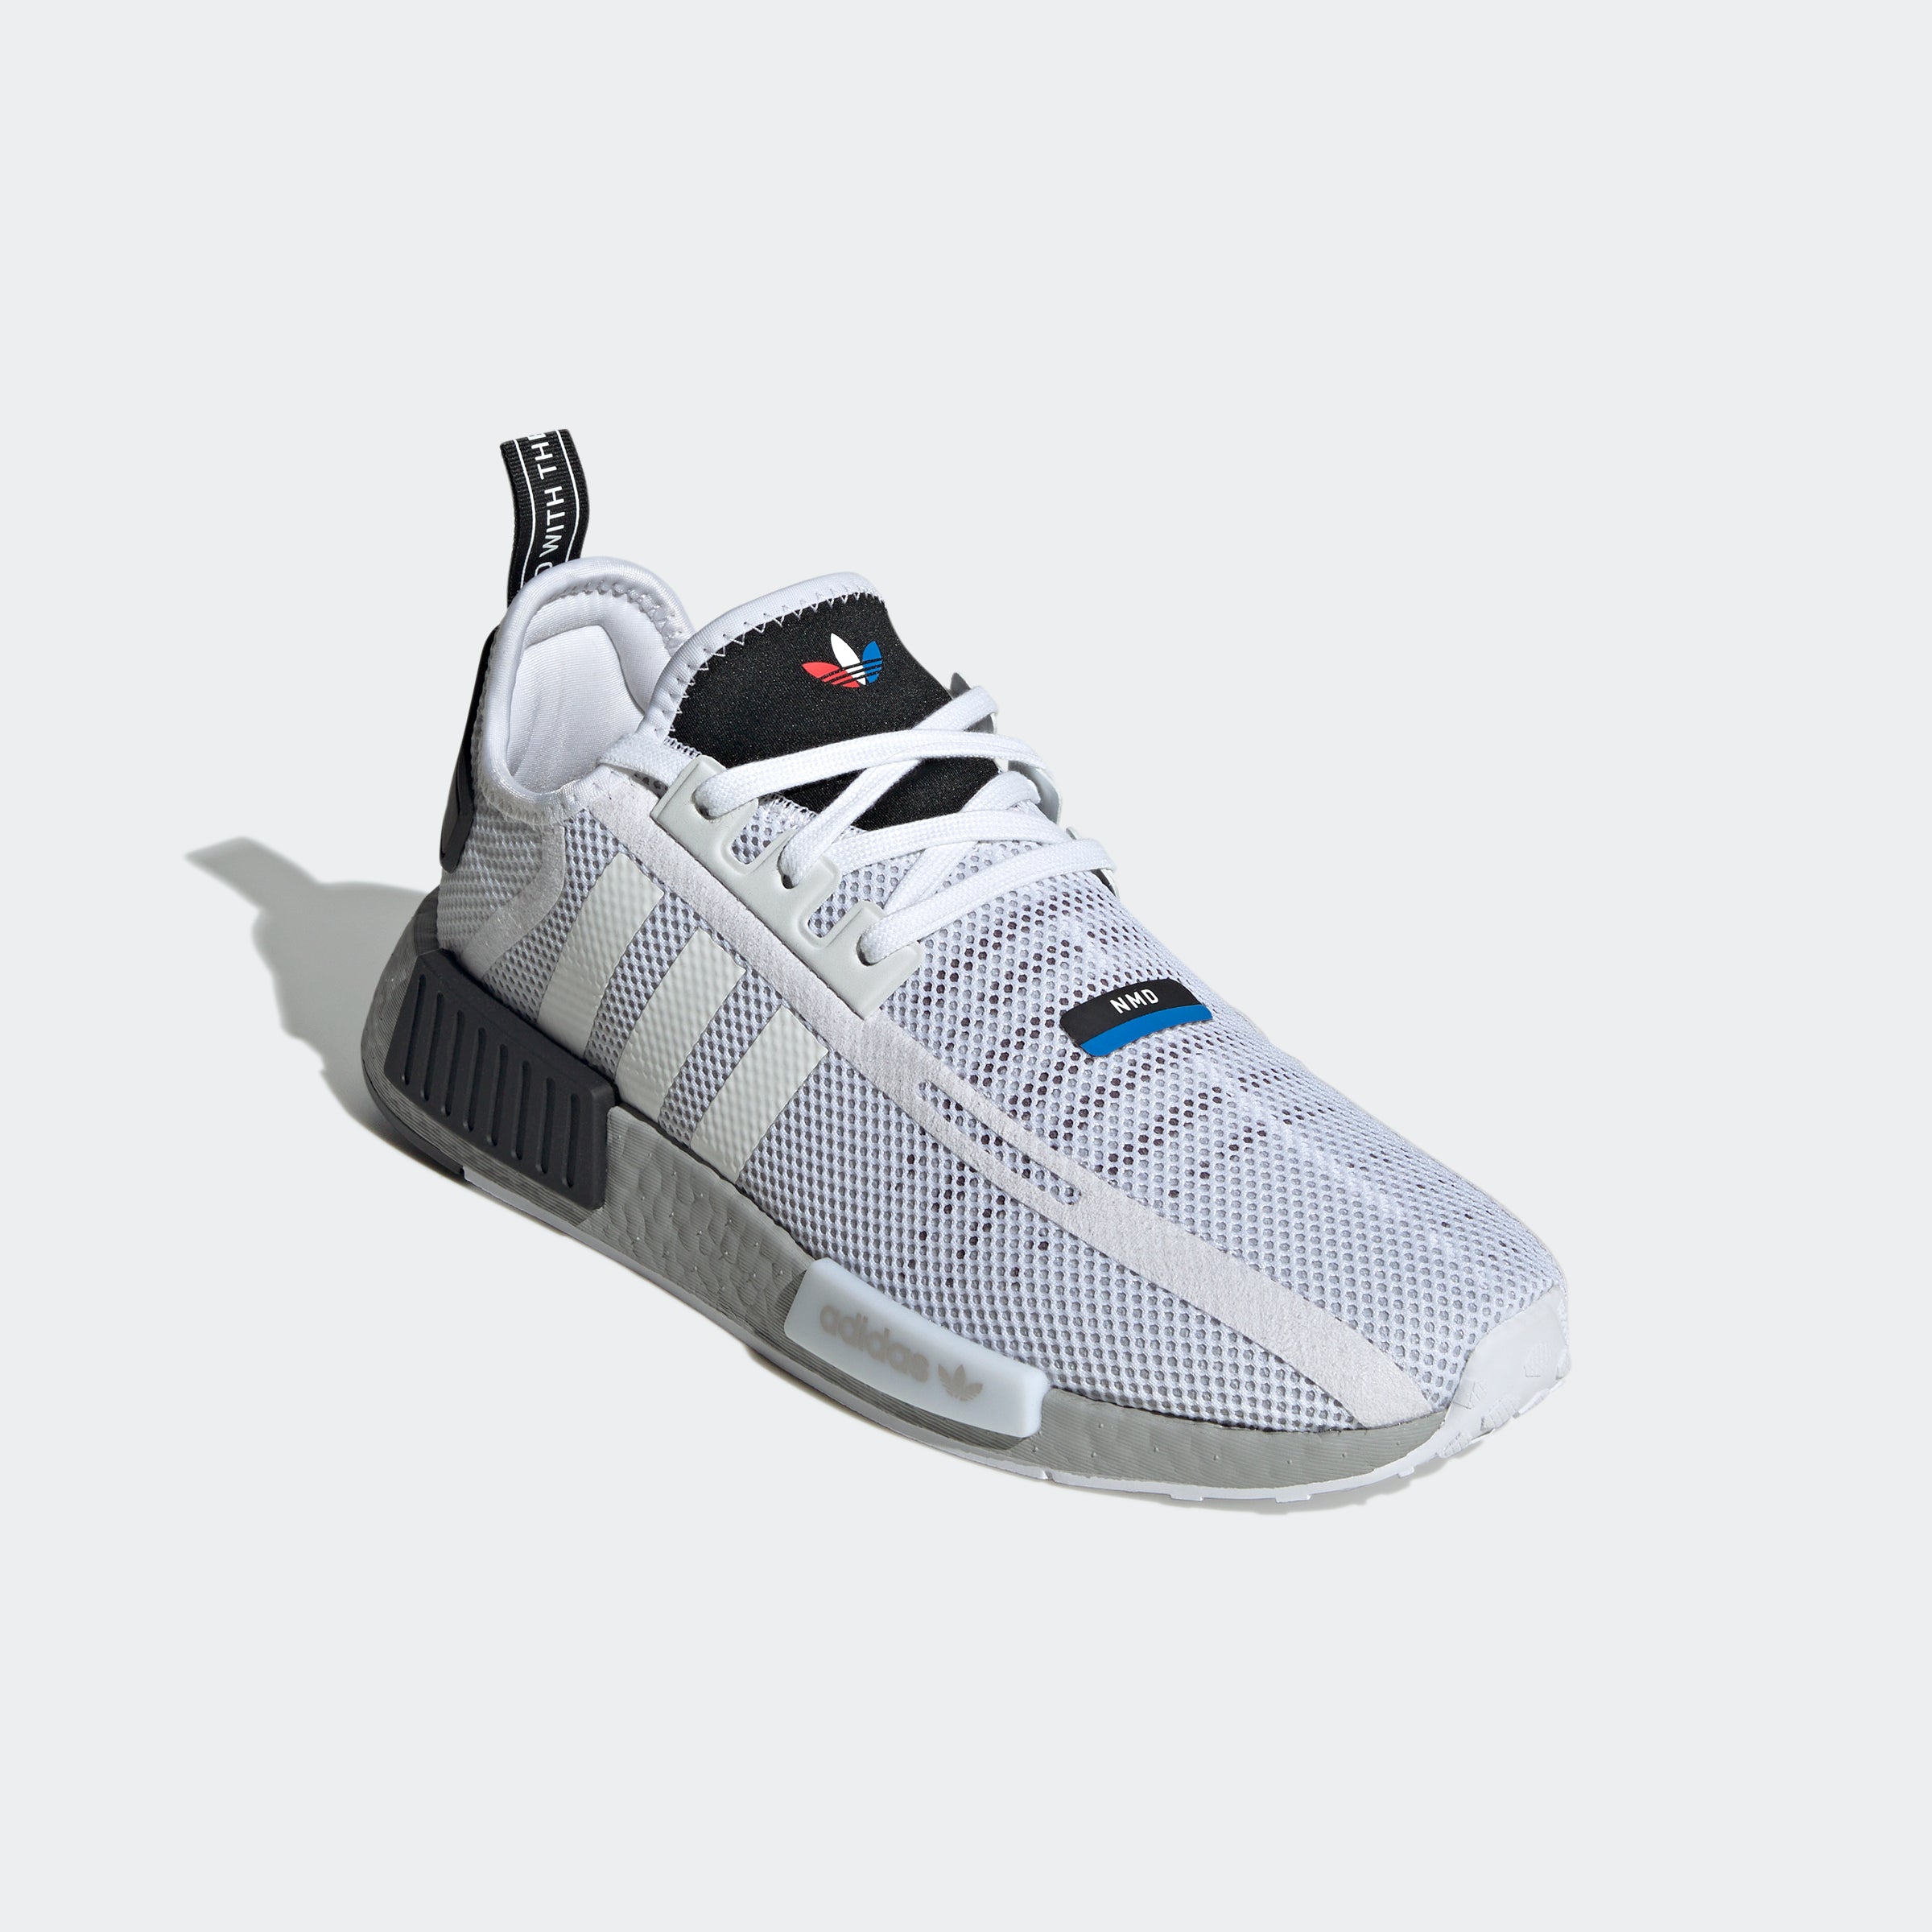 Adidas NMD_R1 Shoes - Men's - Cloud White / Cloud White / Red - 10.5